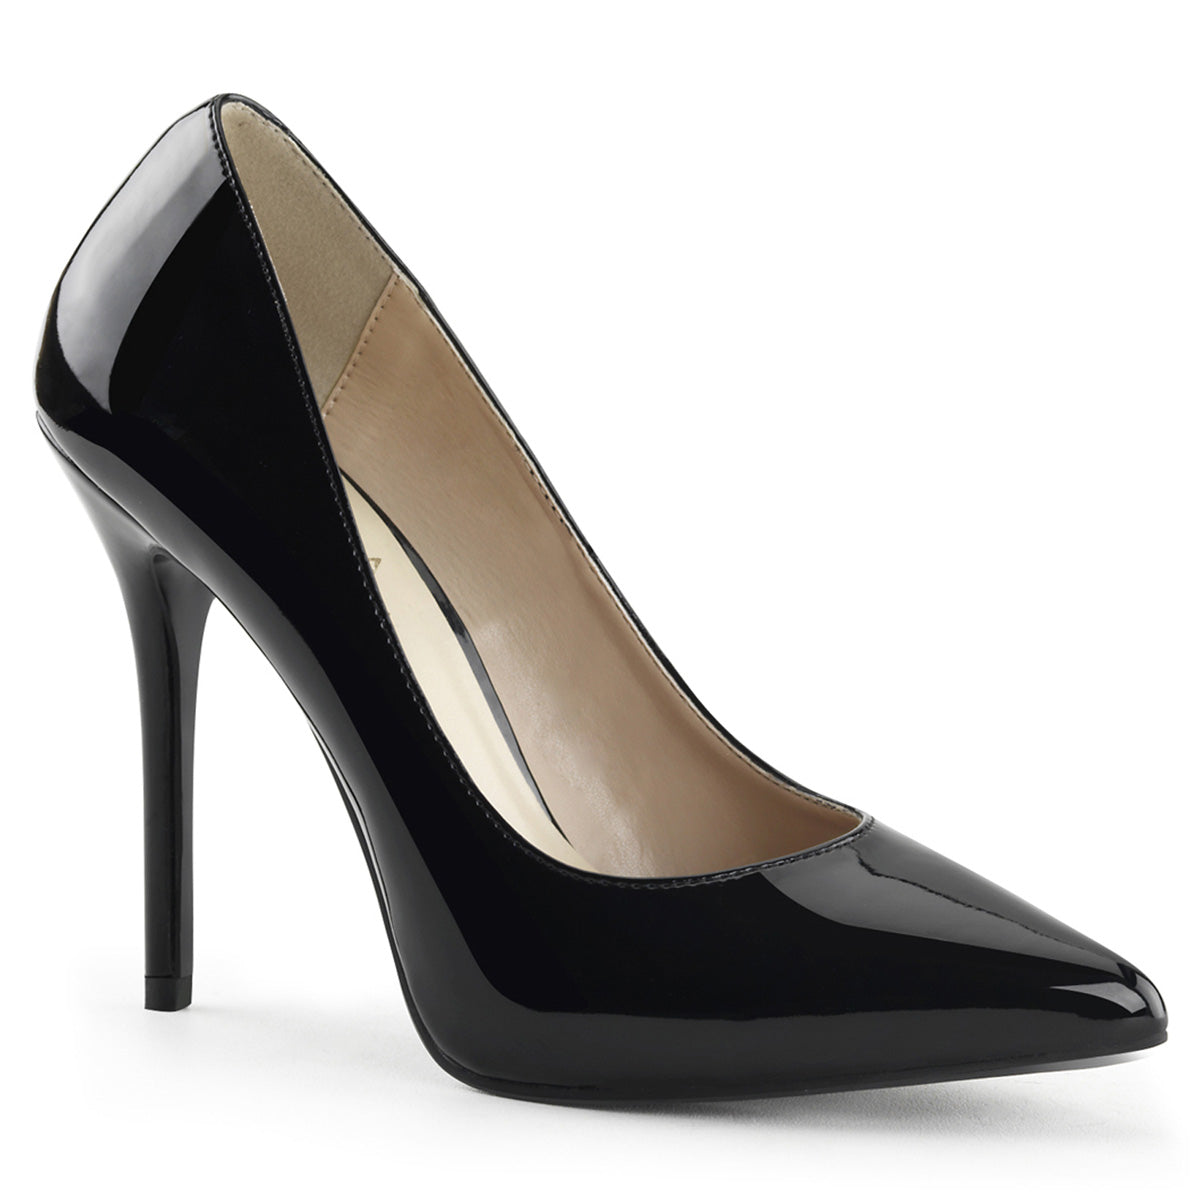 Black patent leather 5" Amuse Pump right side view.